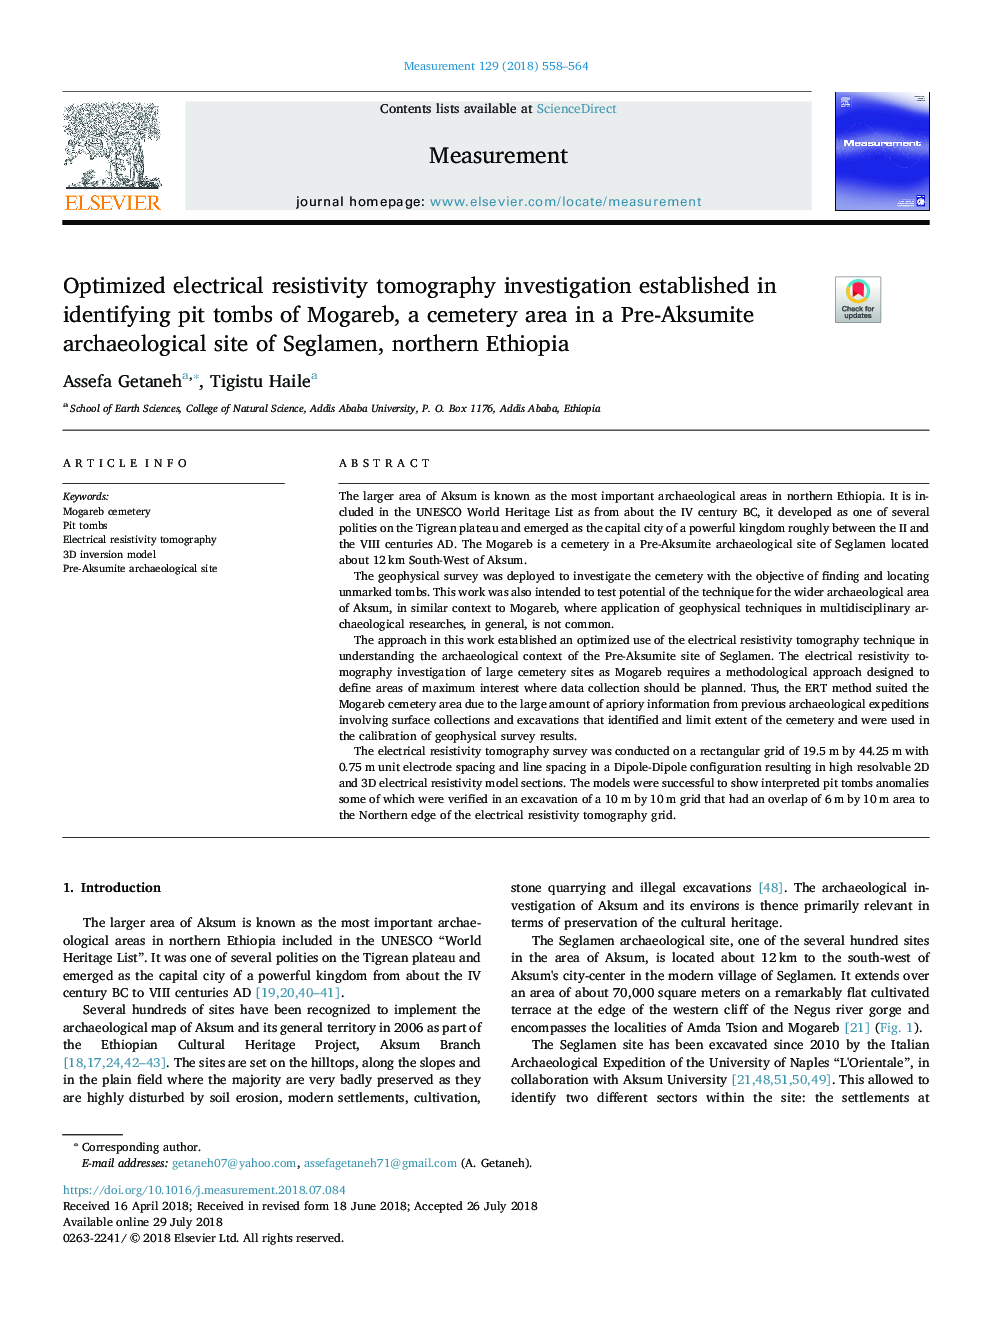 Optimized electrical resistivity tomography investigation established in identifying pit tombs of Mogareb, a cemetery area in a Pre-Aksumite archaeological site of Seglamen, northern Ethiopia